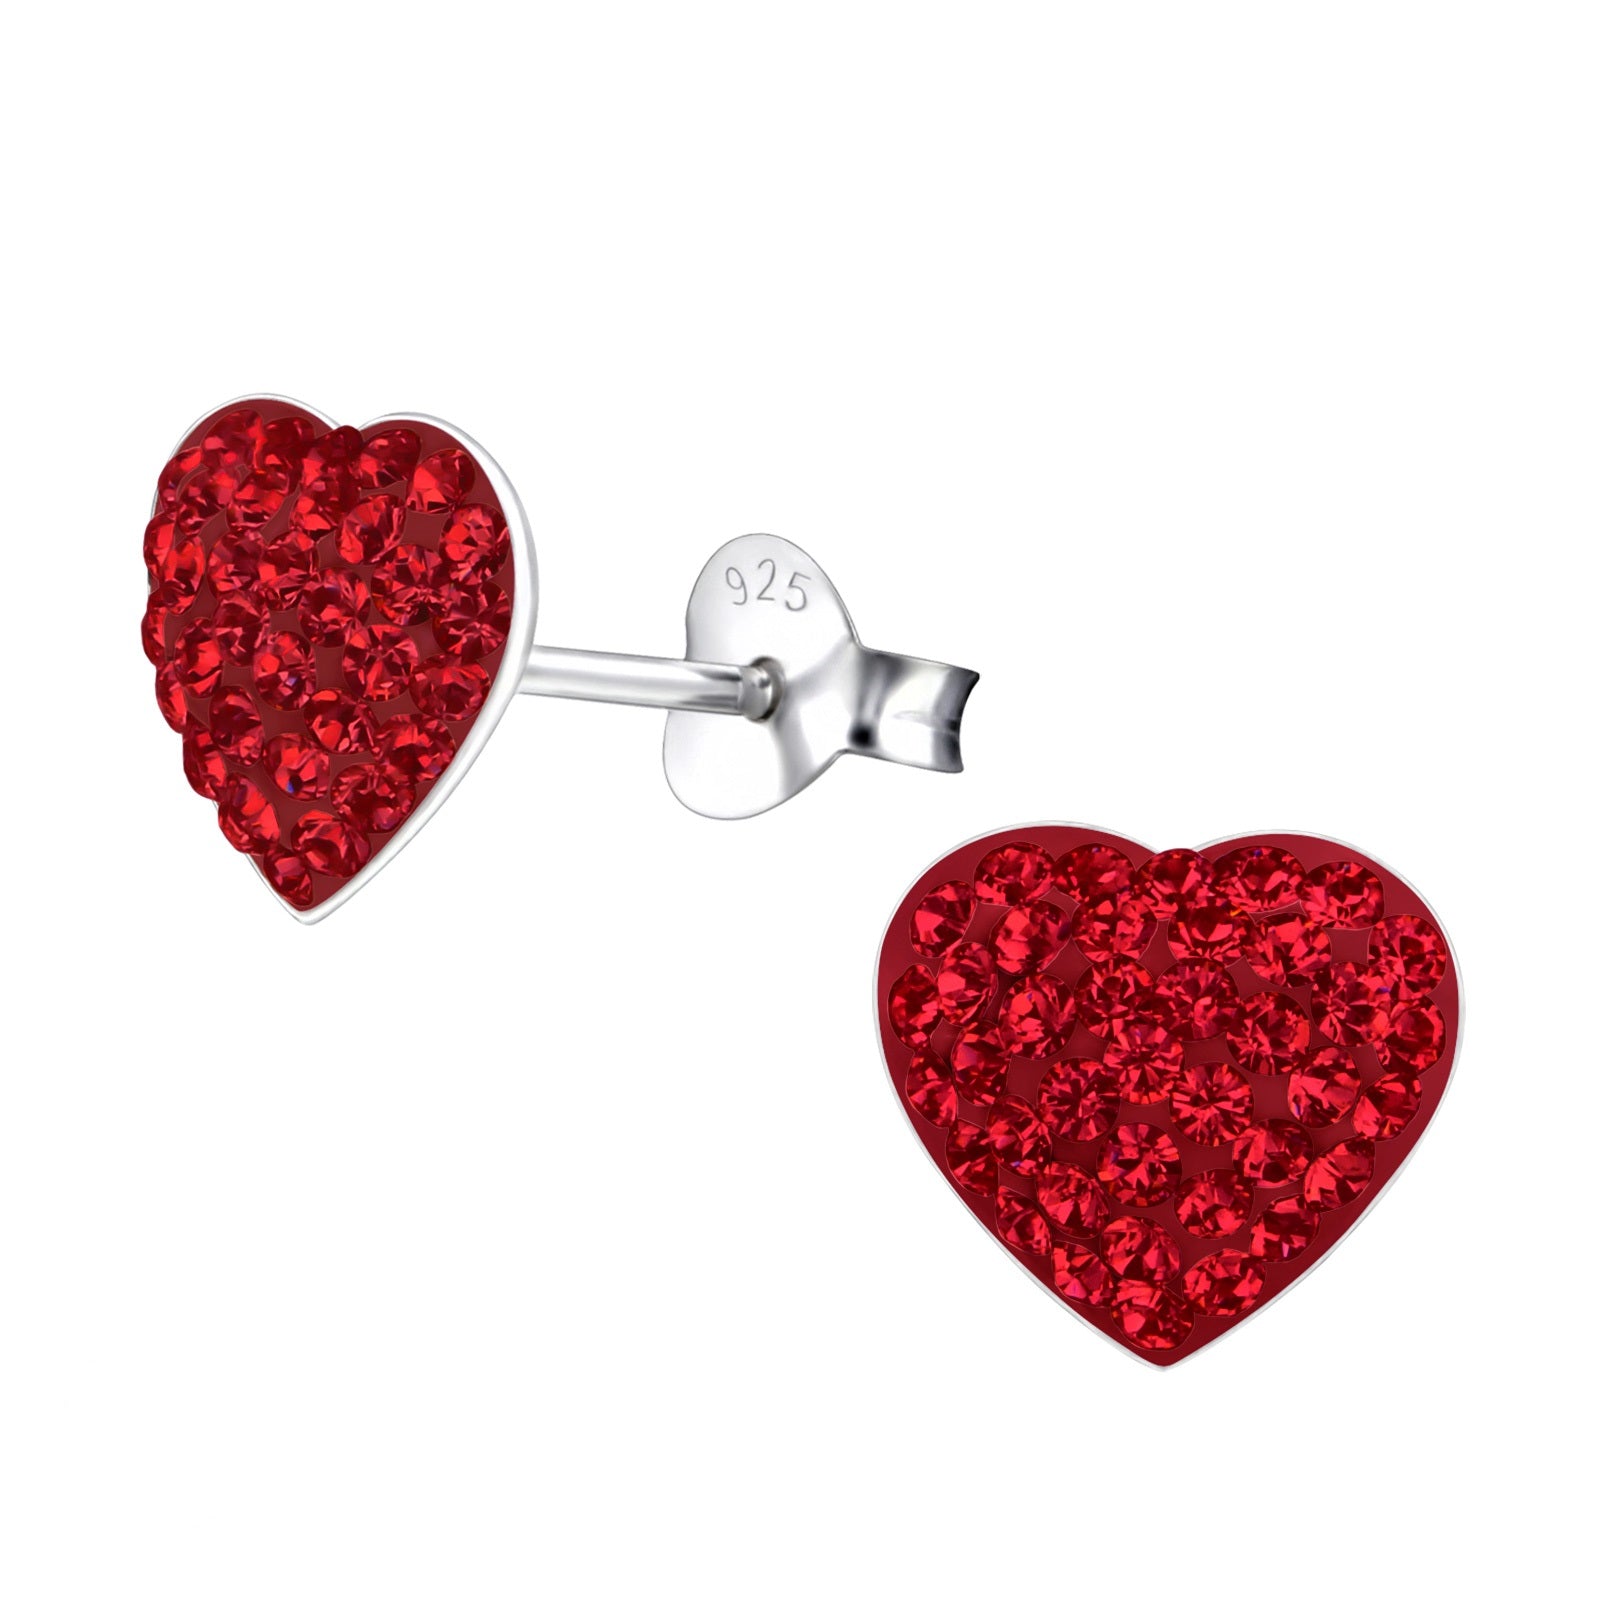 Buy Red Heart Swarovski Crystal Dangle Earrings, Gold Filled or Sterling  Silver, Christmas Red Garnet Birthday Gift, Sparkly Valentine Jewelry  Online in India - Etsy